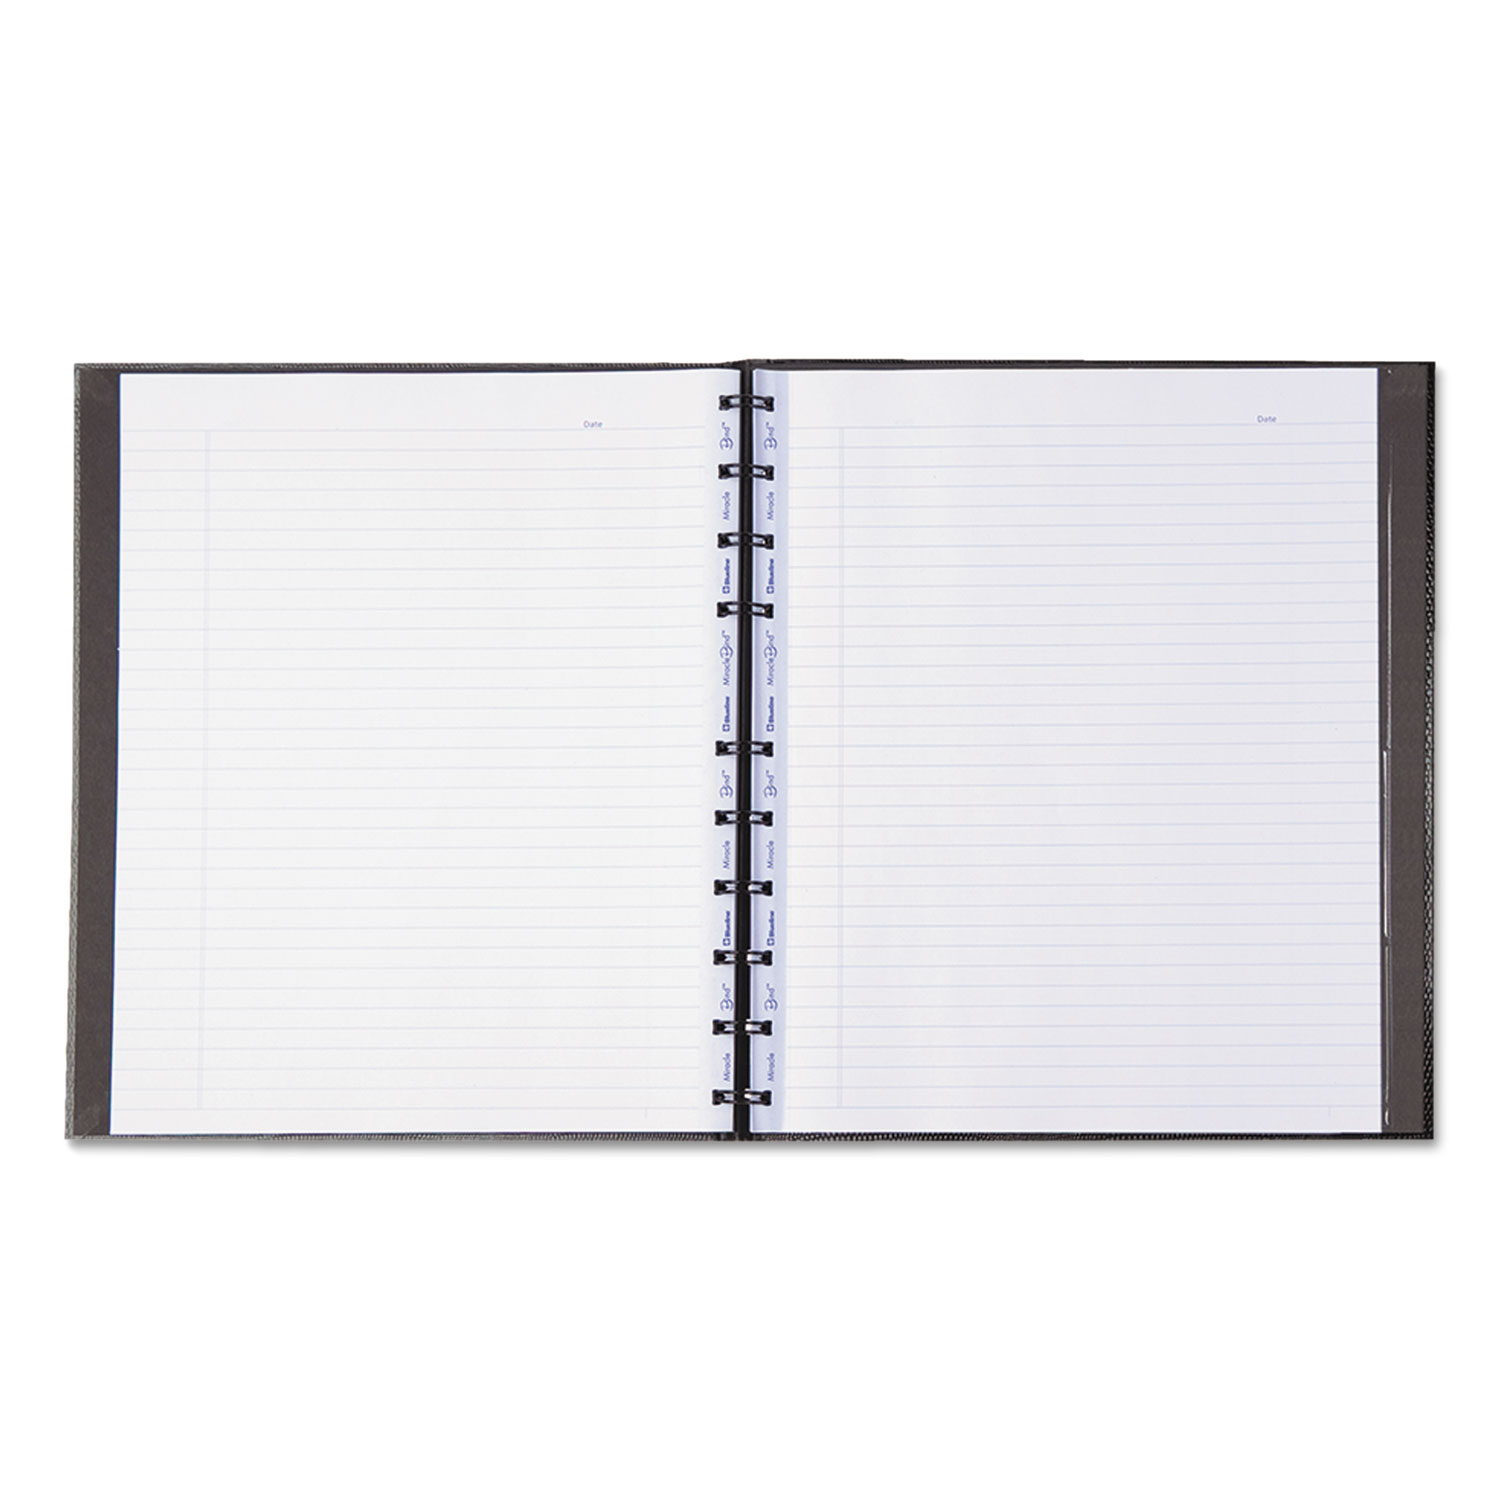 MiracleBind Notebook, College/Margin, 11 x 9 1/16, White, Black Cover, 75 Sheets